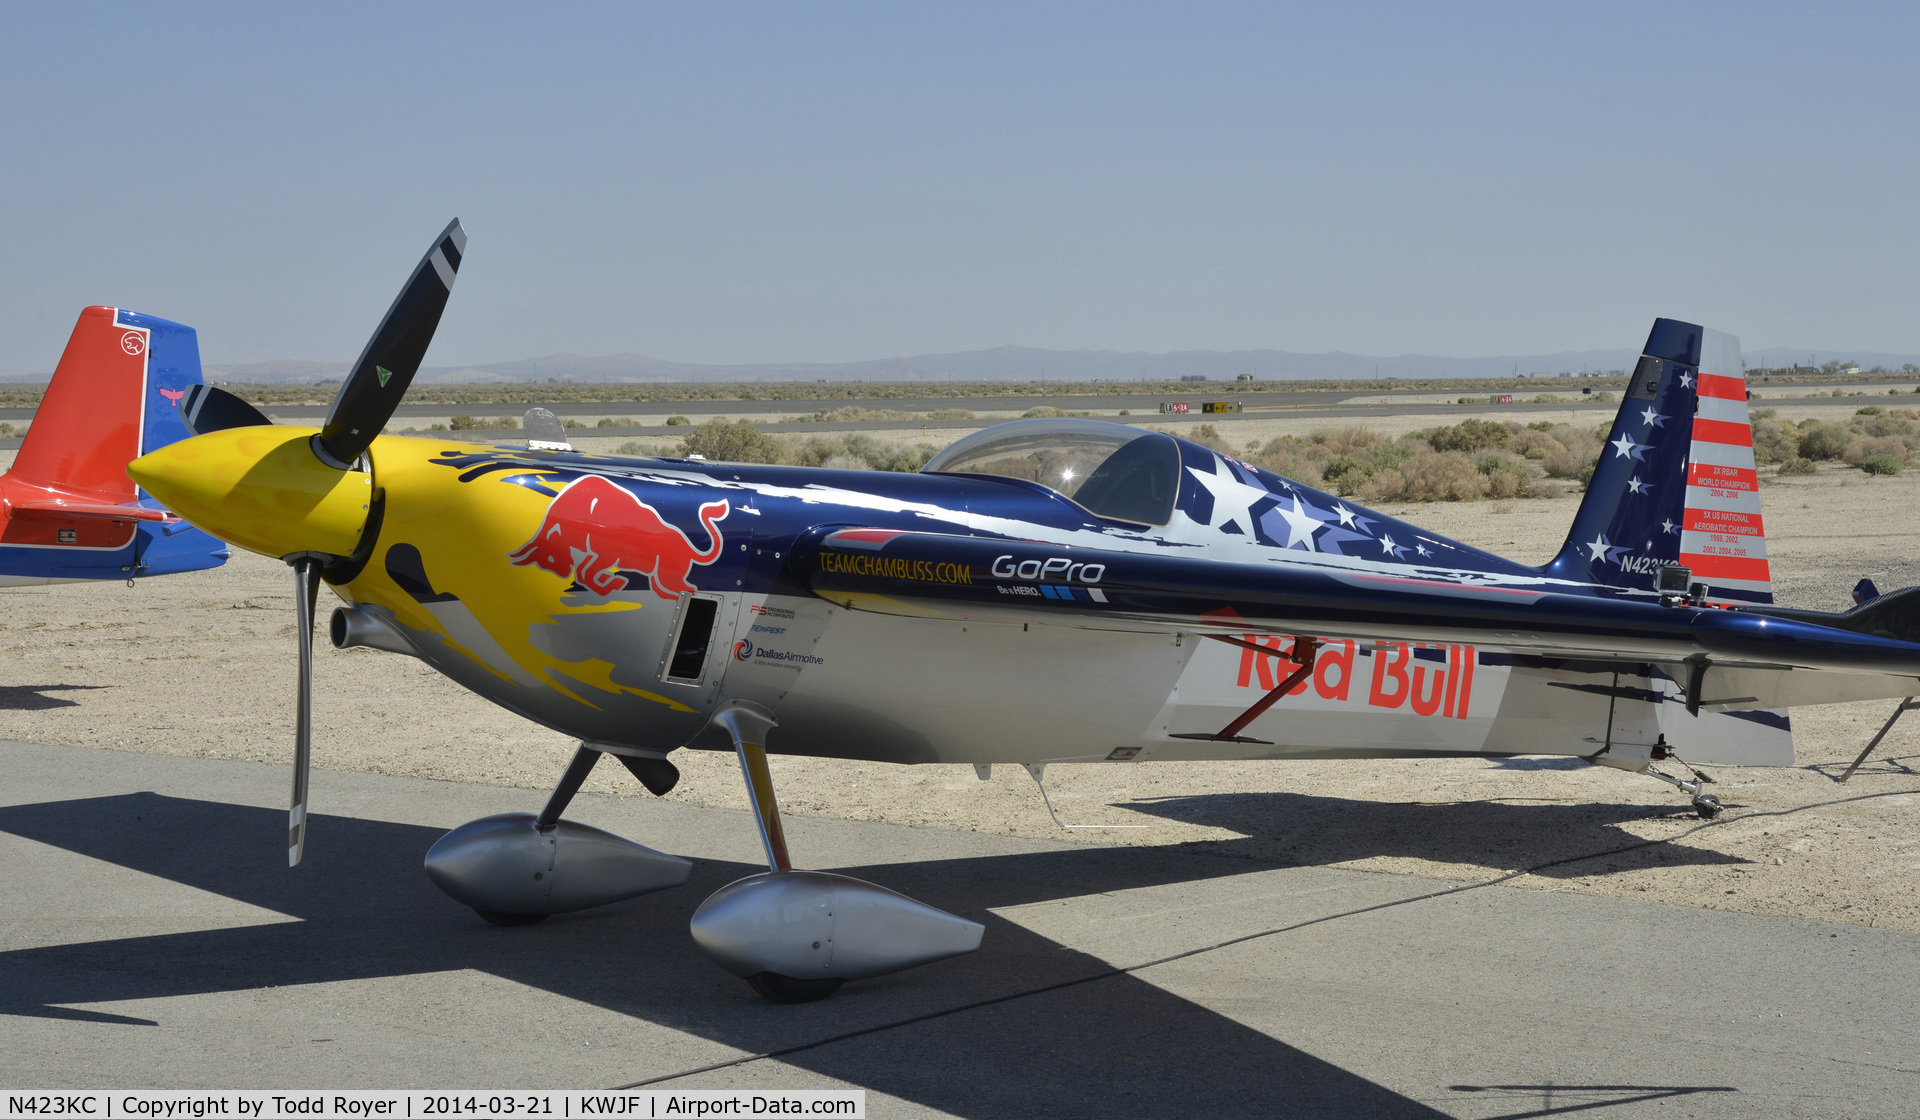 N423KC, 2009 Zivko Edge 540 C/N 0044, Waiting to perform at the Los Angeles County Airshow 2014